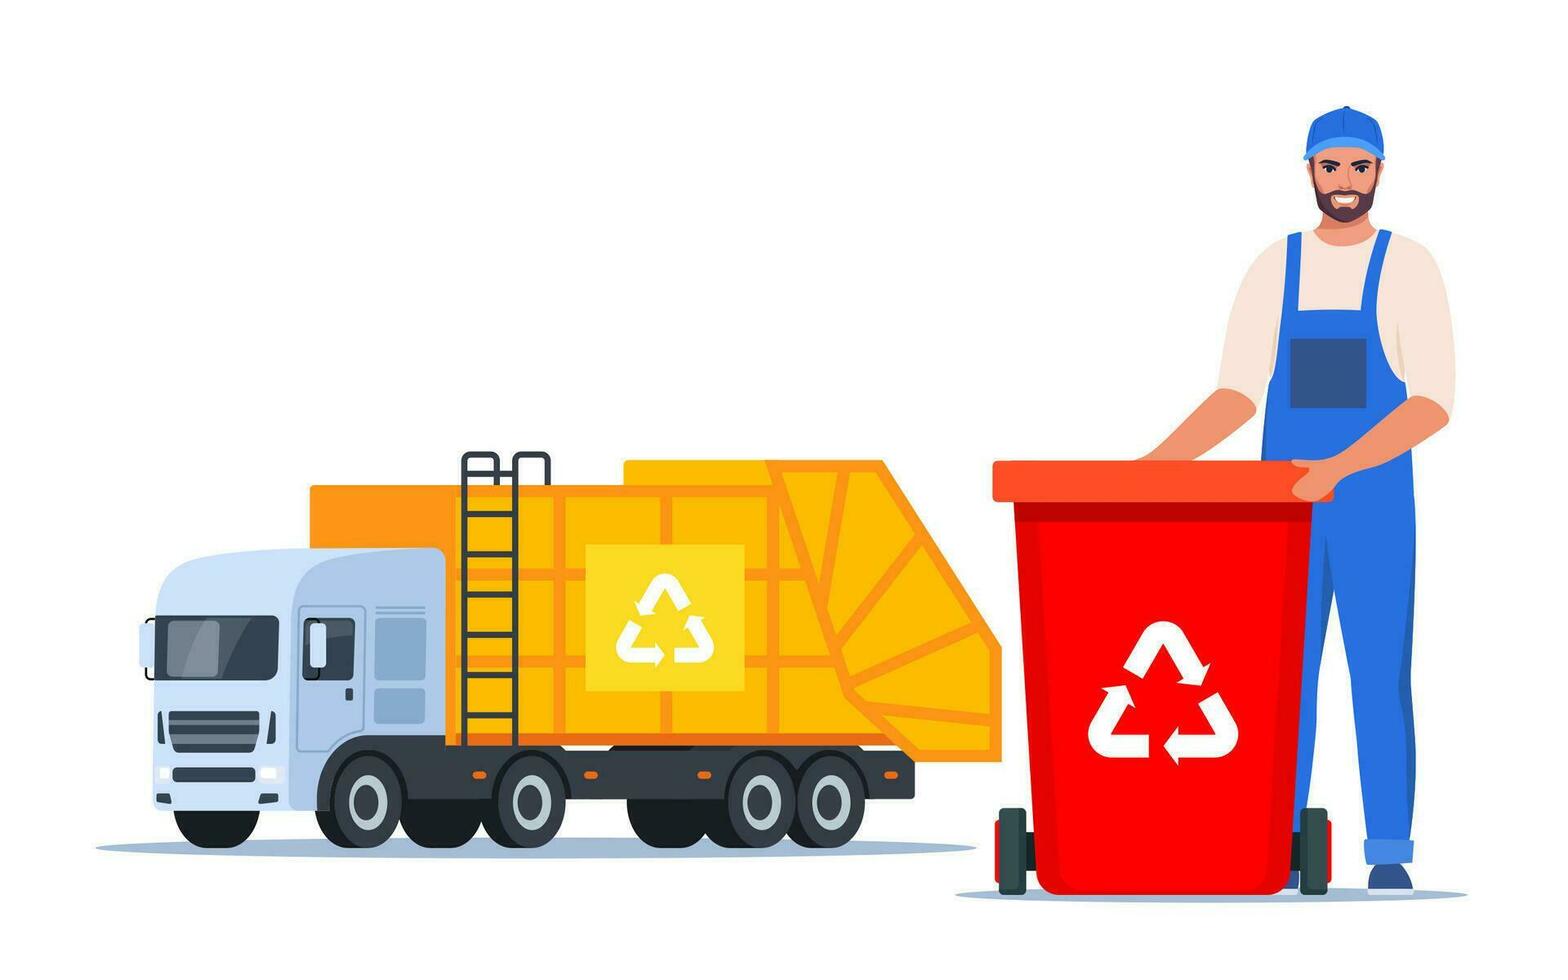 Garbage truck and sanitation worker. Garbage man in uniform with trash bin and recycling symbol on it. Garbage sorting. Zero waste, environment protection concept. Vector illustration.